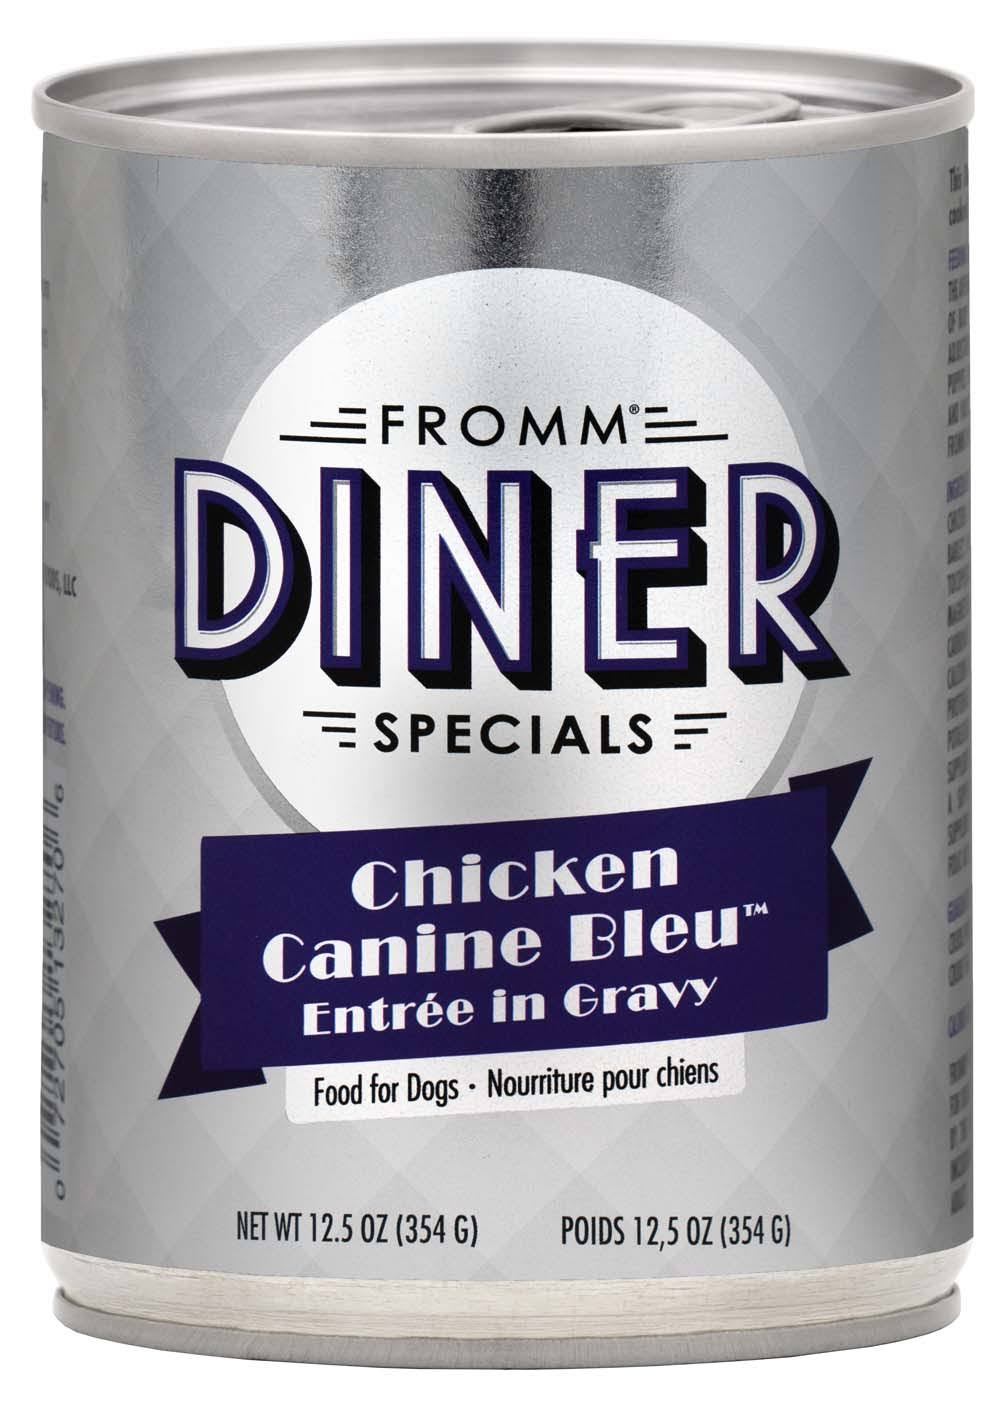 Fromm Diner Classics Dog Food - Chicken Canine Bleu Entree